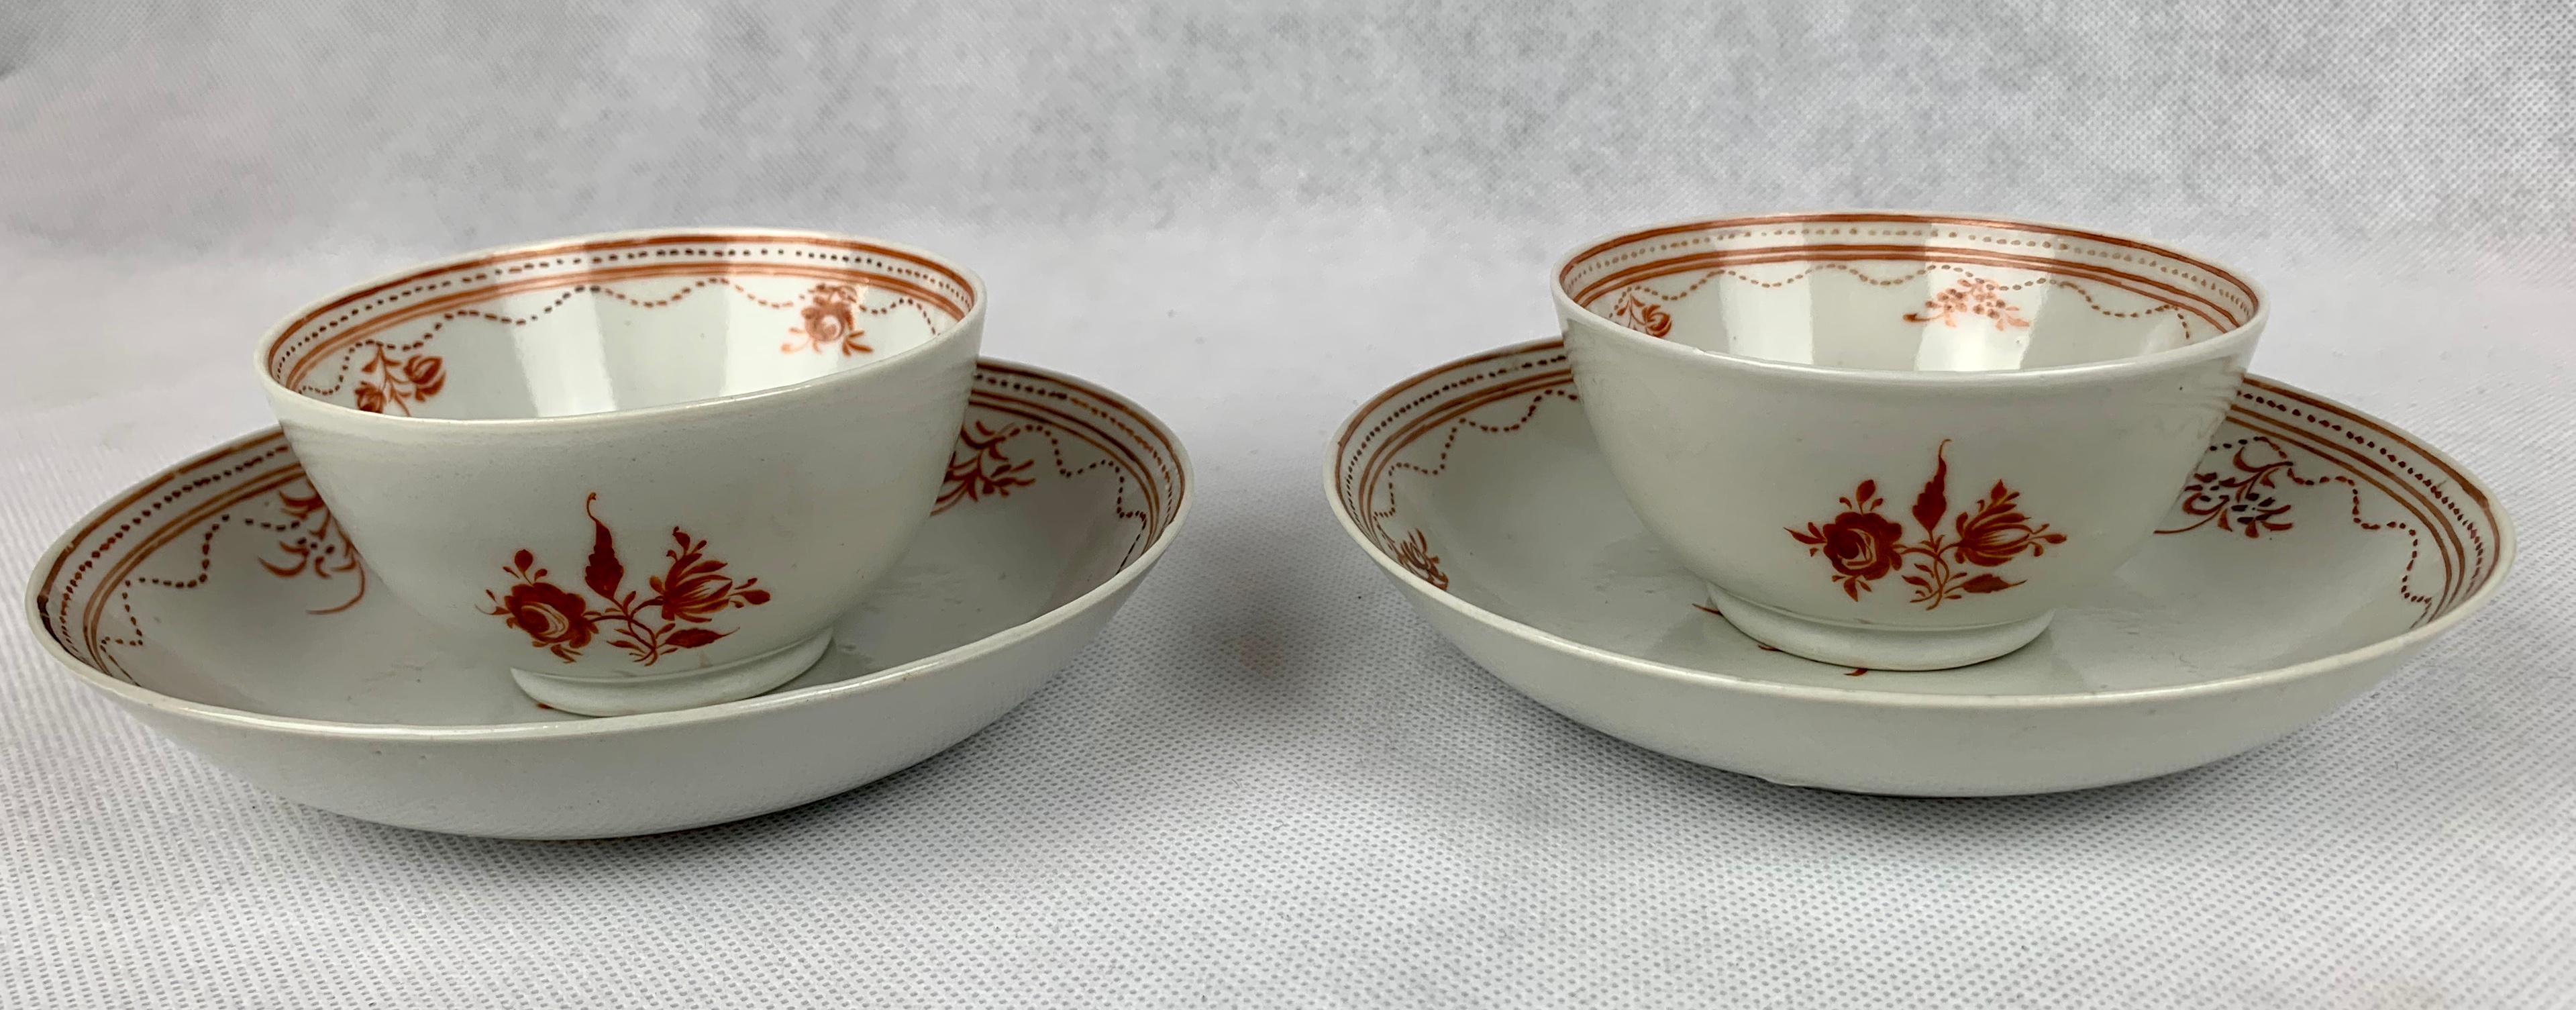 Chinese Export Porcelain Handleless Cups & Saucers in Sepia-China, 18th c.  1